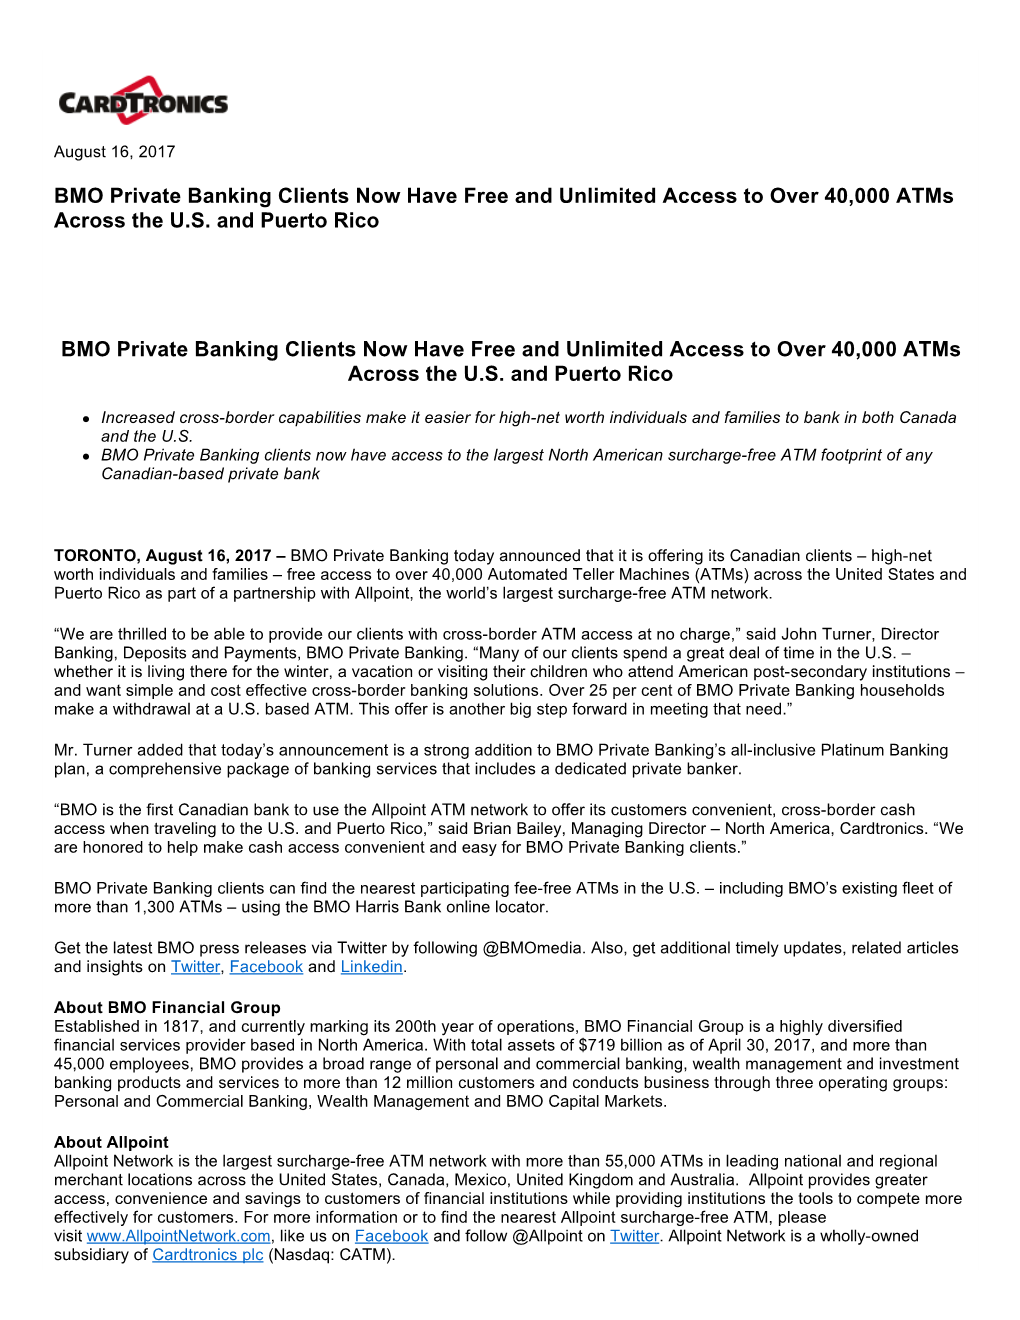 BMO Private Banking Clients Now Have Free and Unlimited Access to Over 40,000 Atms Across the U.S